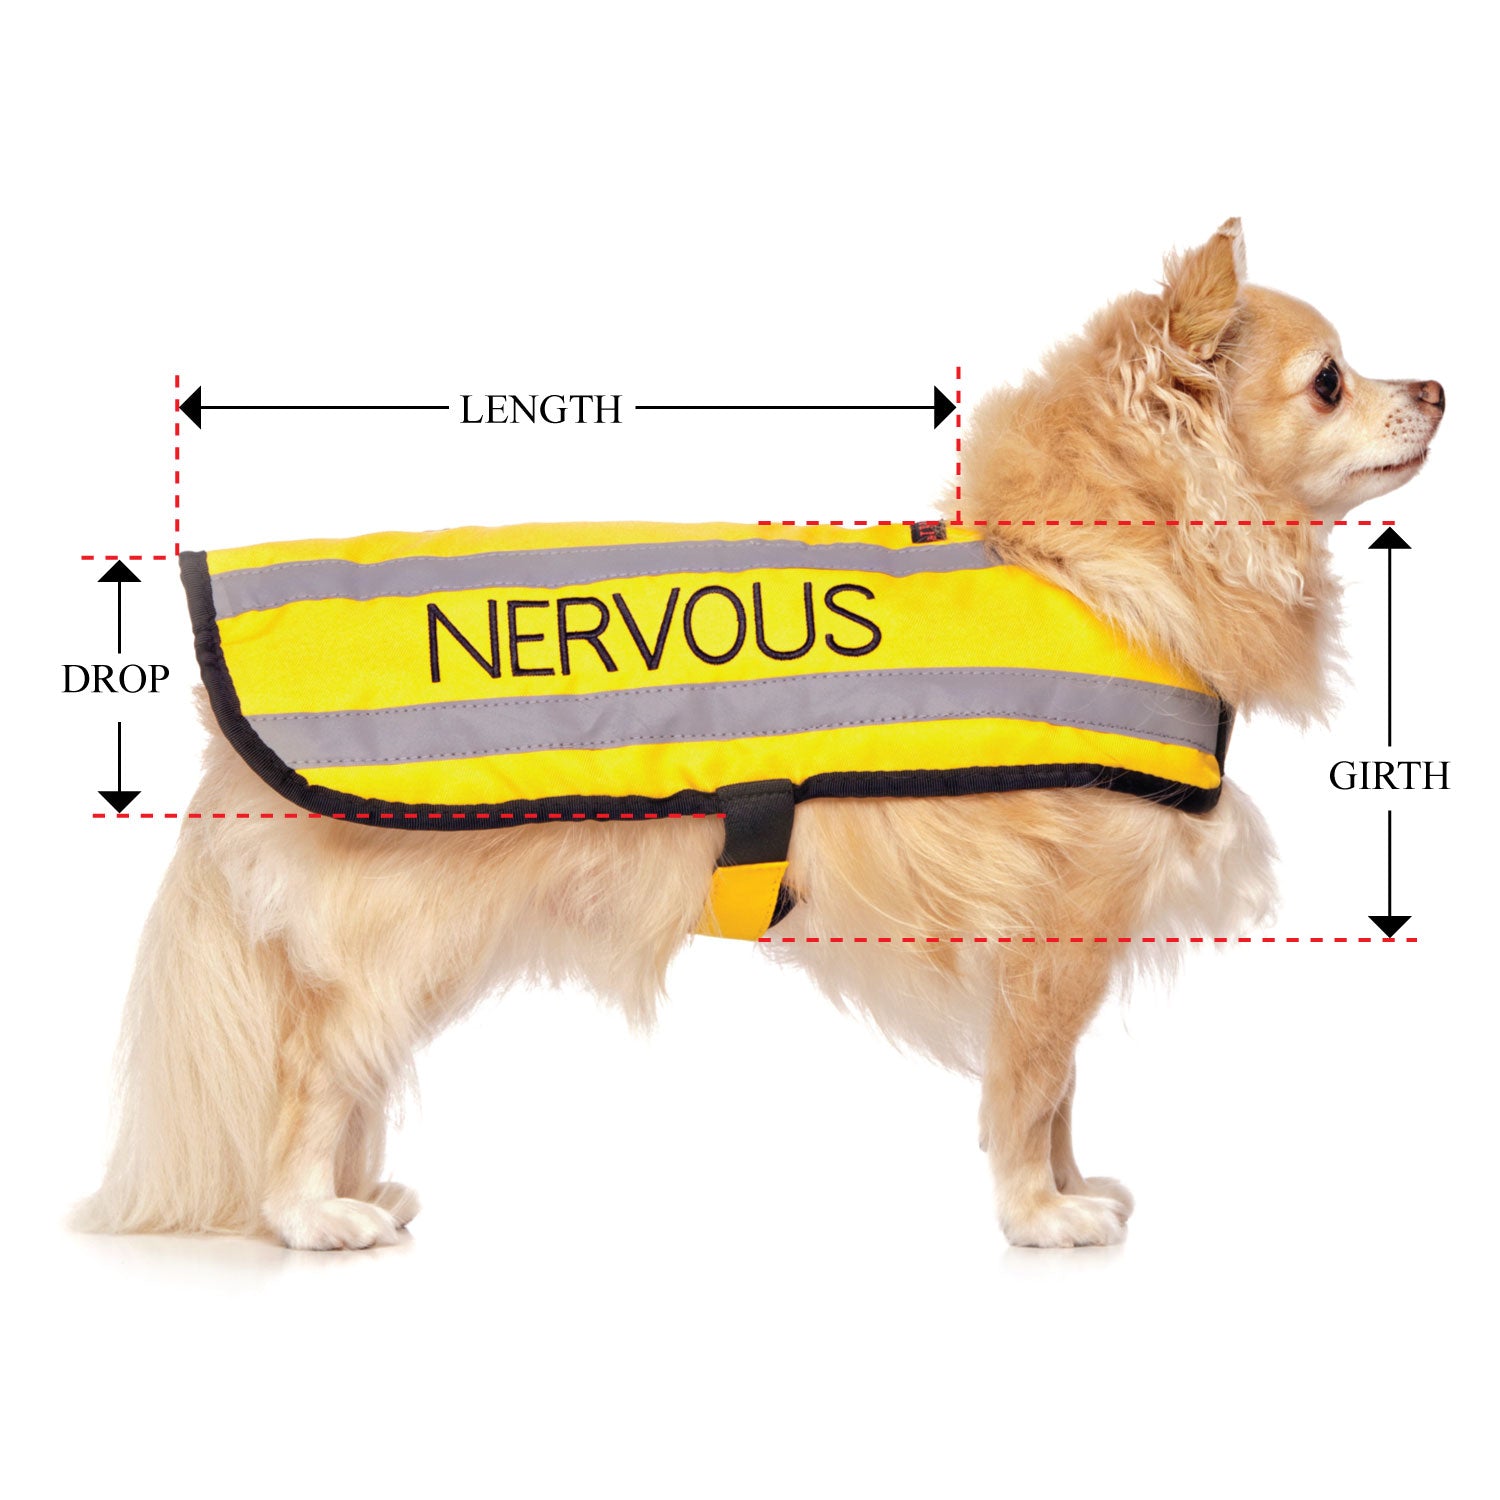 Dexil Friendly Dog Collars yellow NERVOUS Small Reflective Coat 